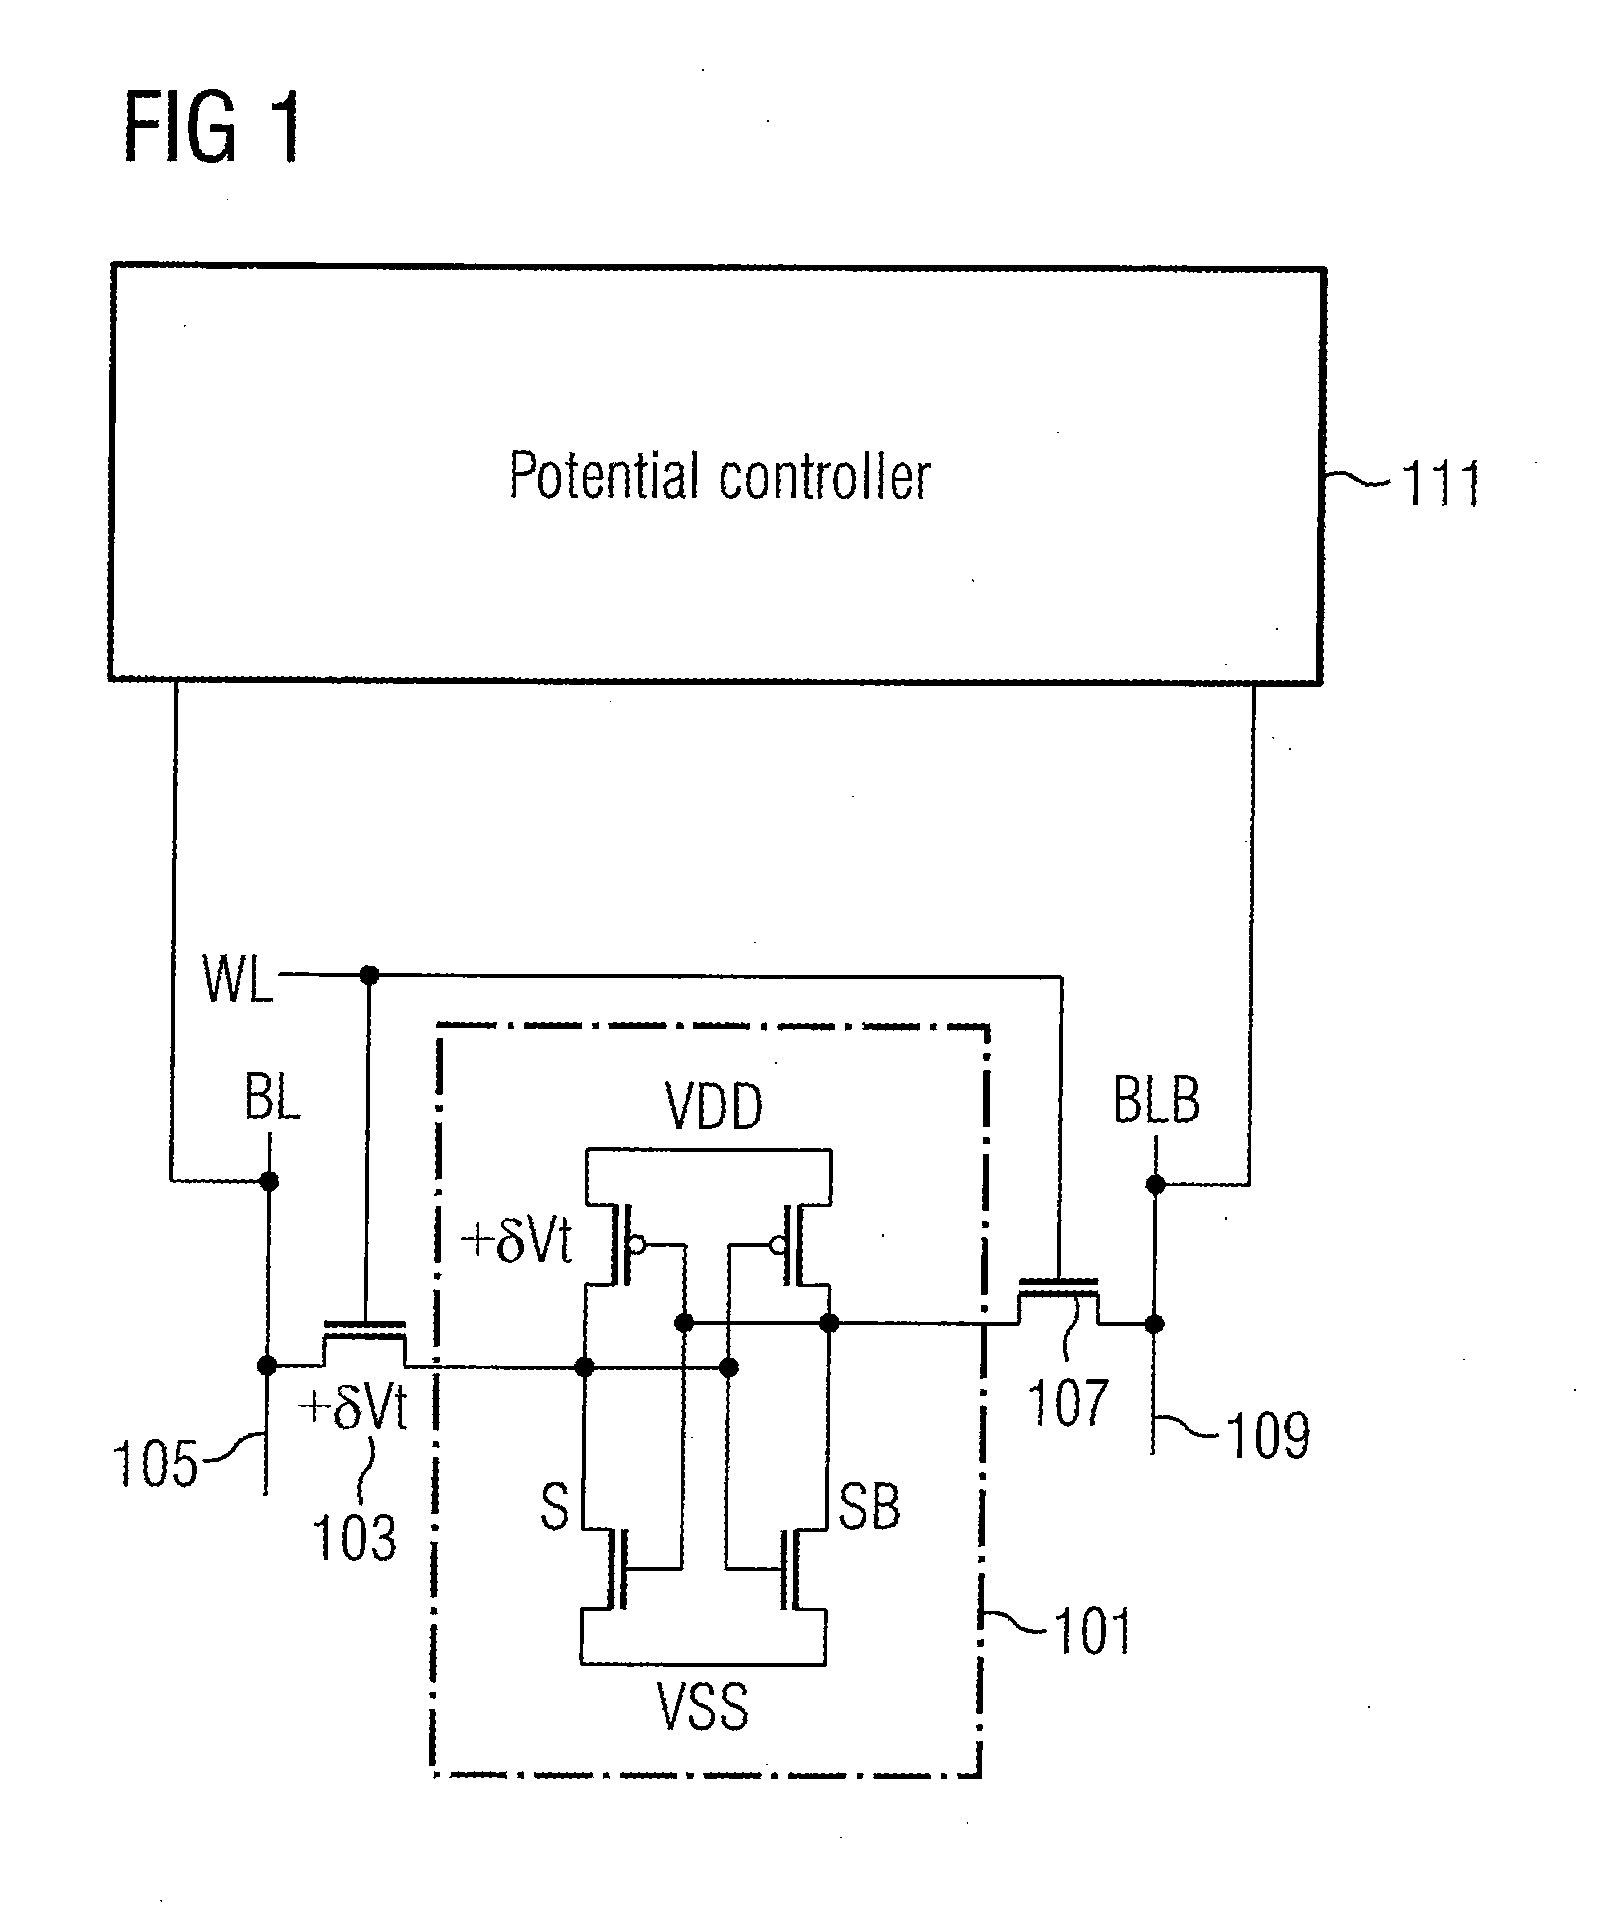 Memory device with improved writing capabilities